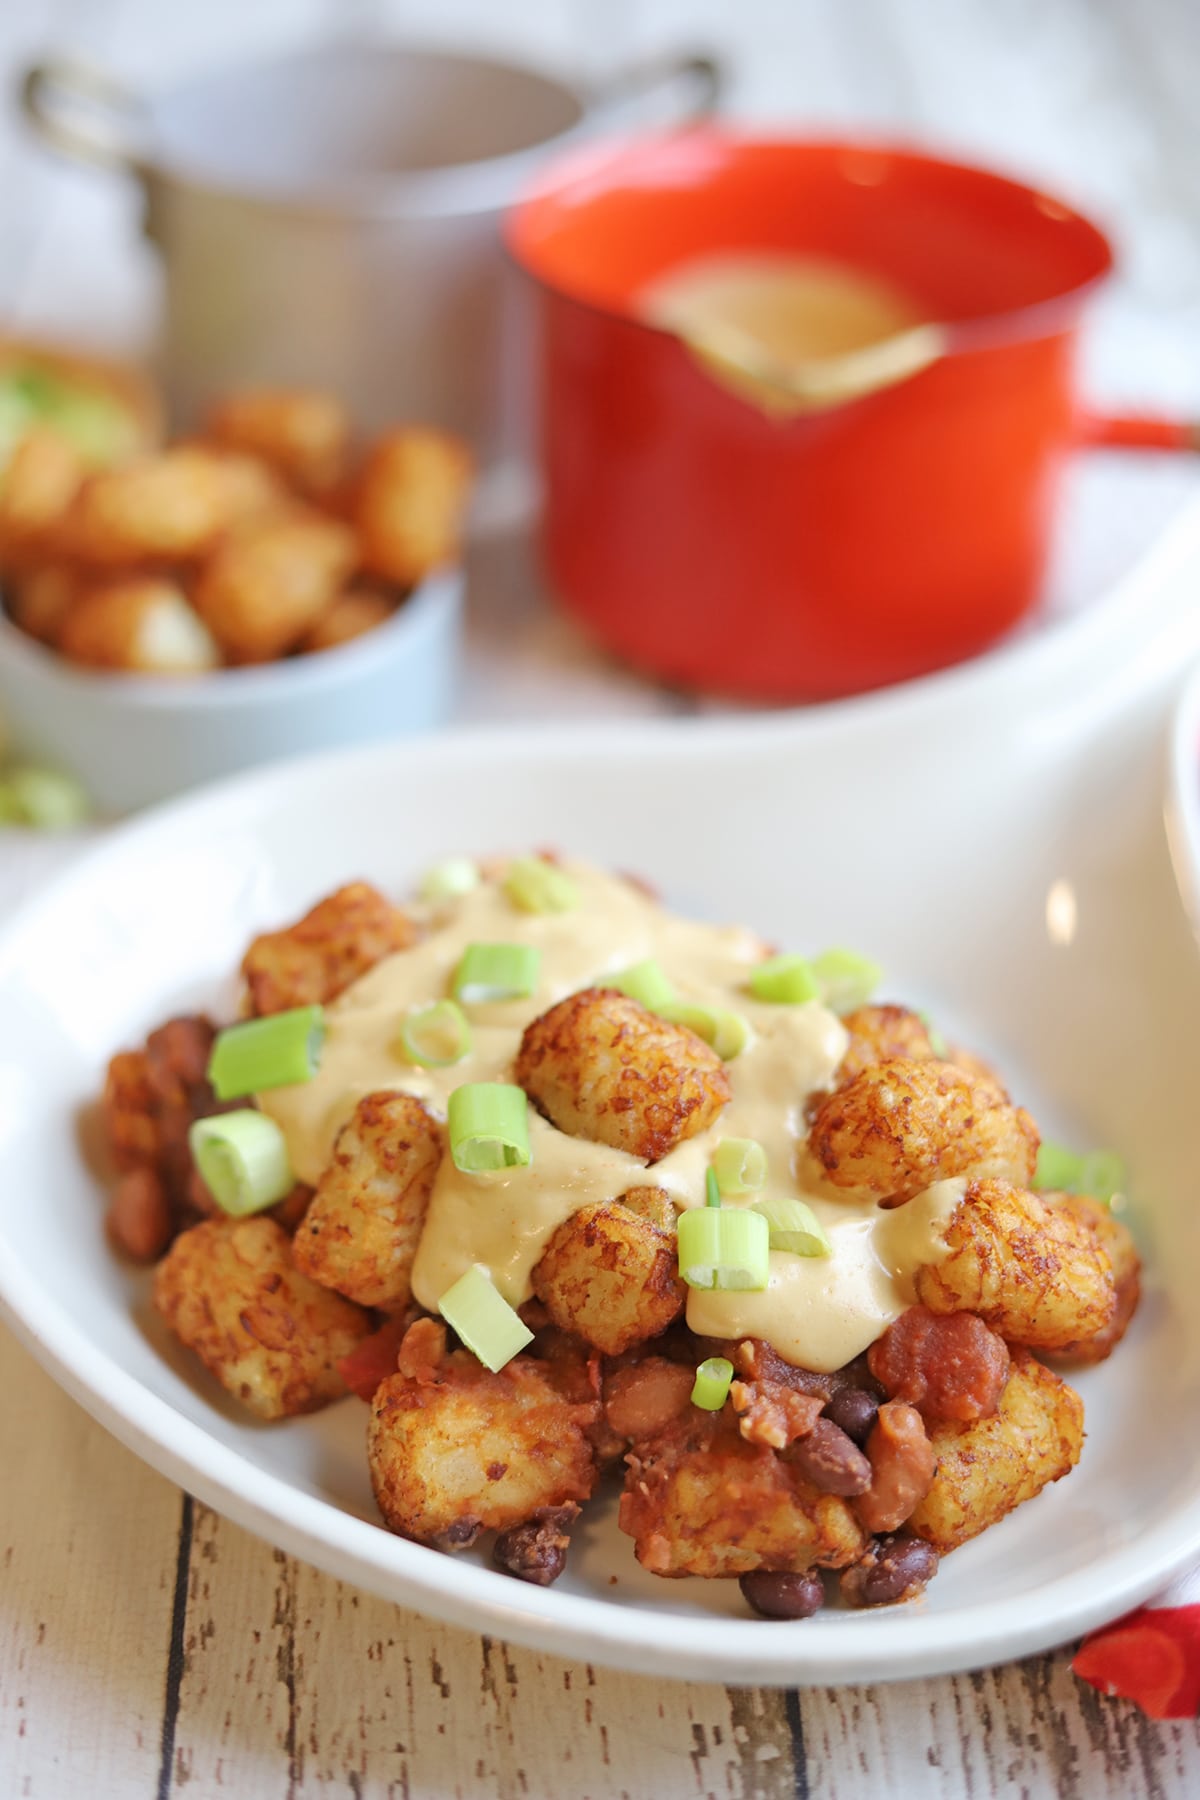 Chili cheese tots on platter.